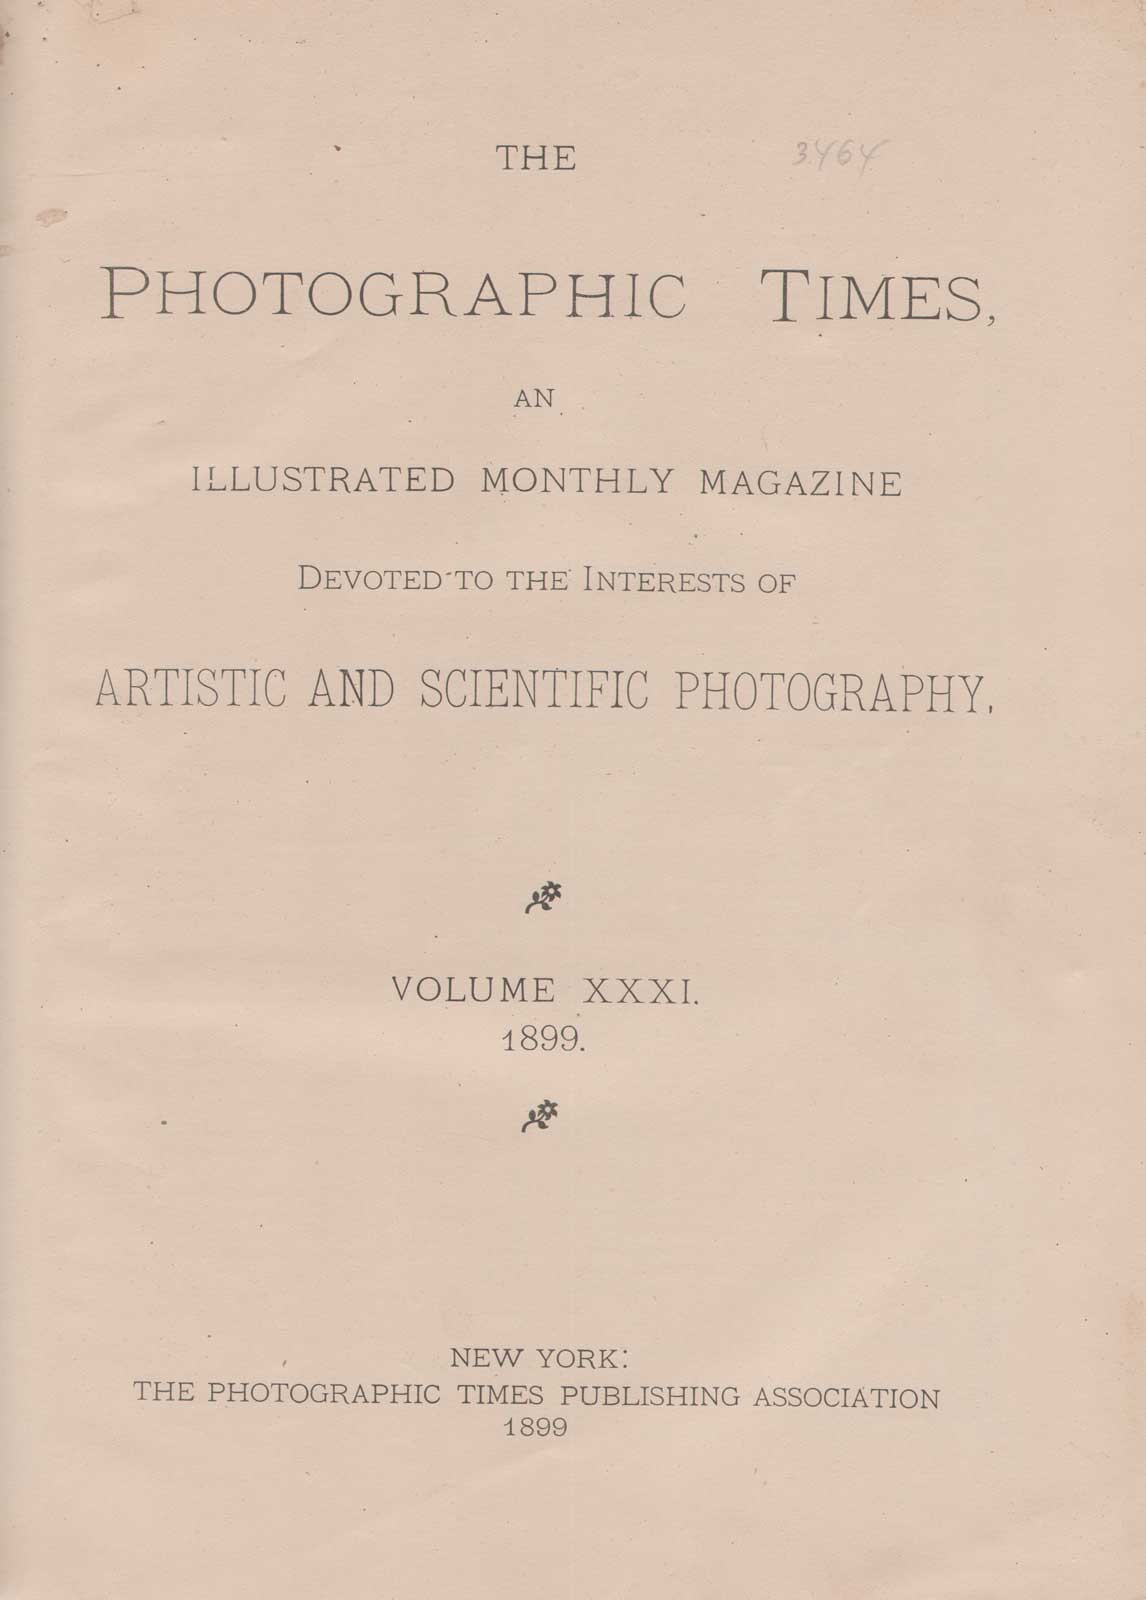 Title page: The Photographic Times: 1899